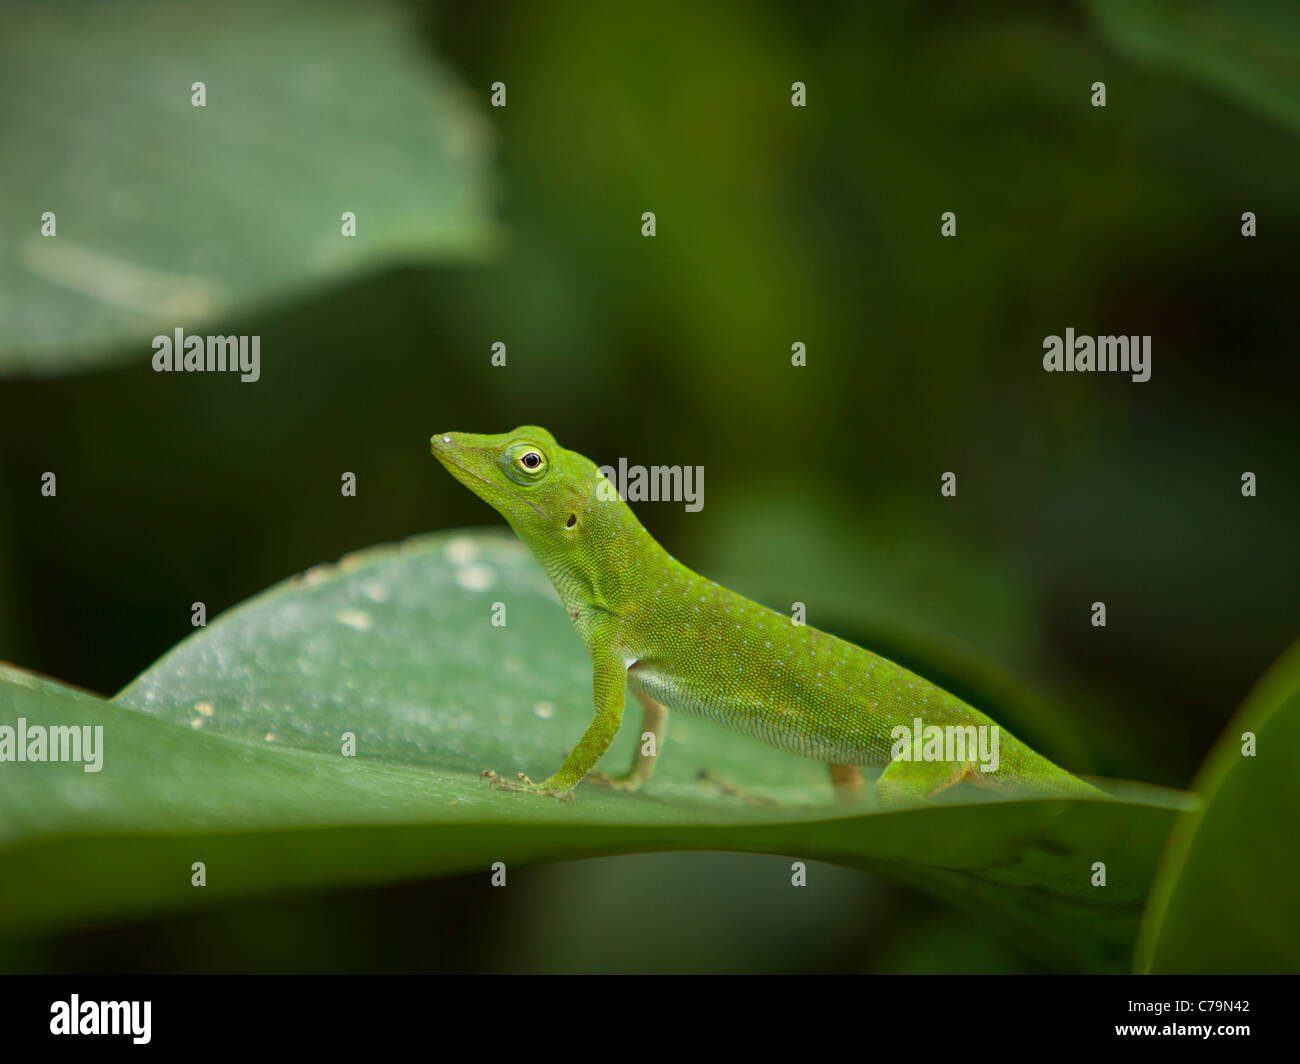 Costa Rica, Close up view of small green lizard Stock Photo